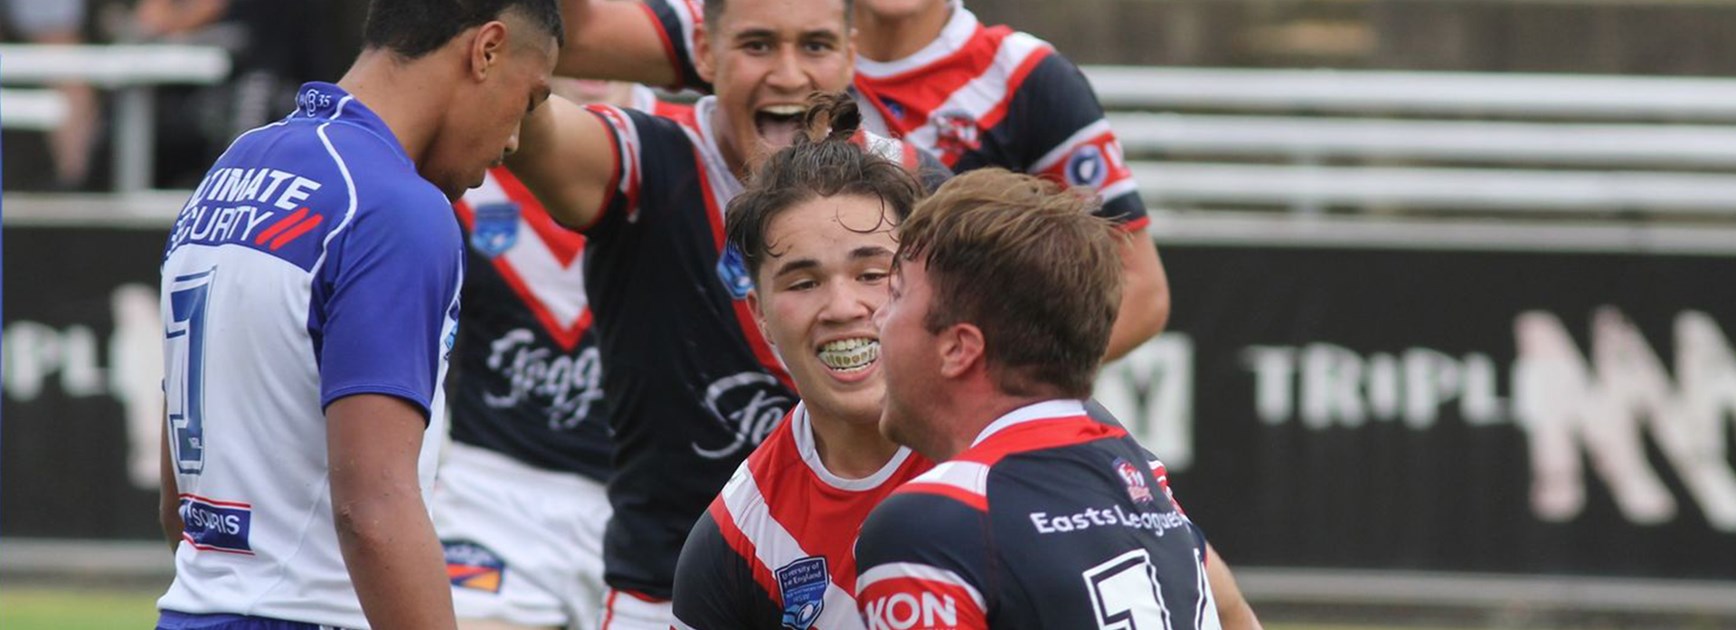 RESULTS: Roosters Juniors Enjoy Superb Start to Season